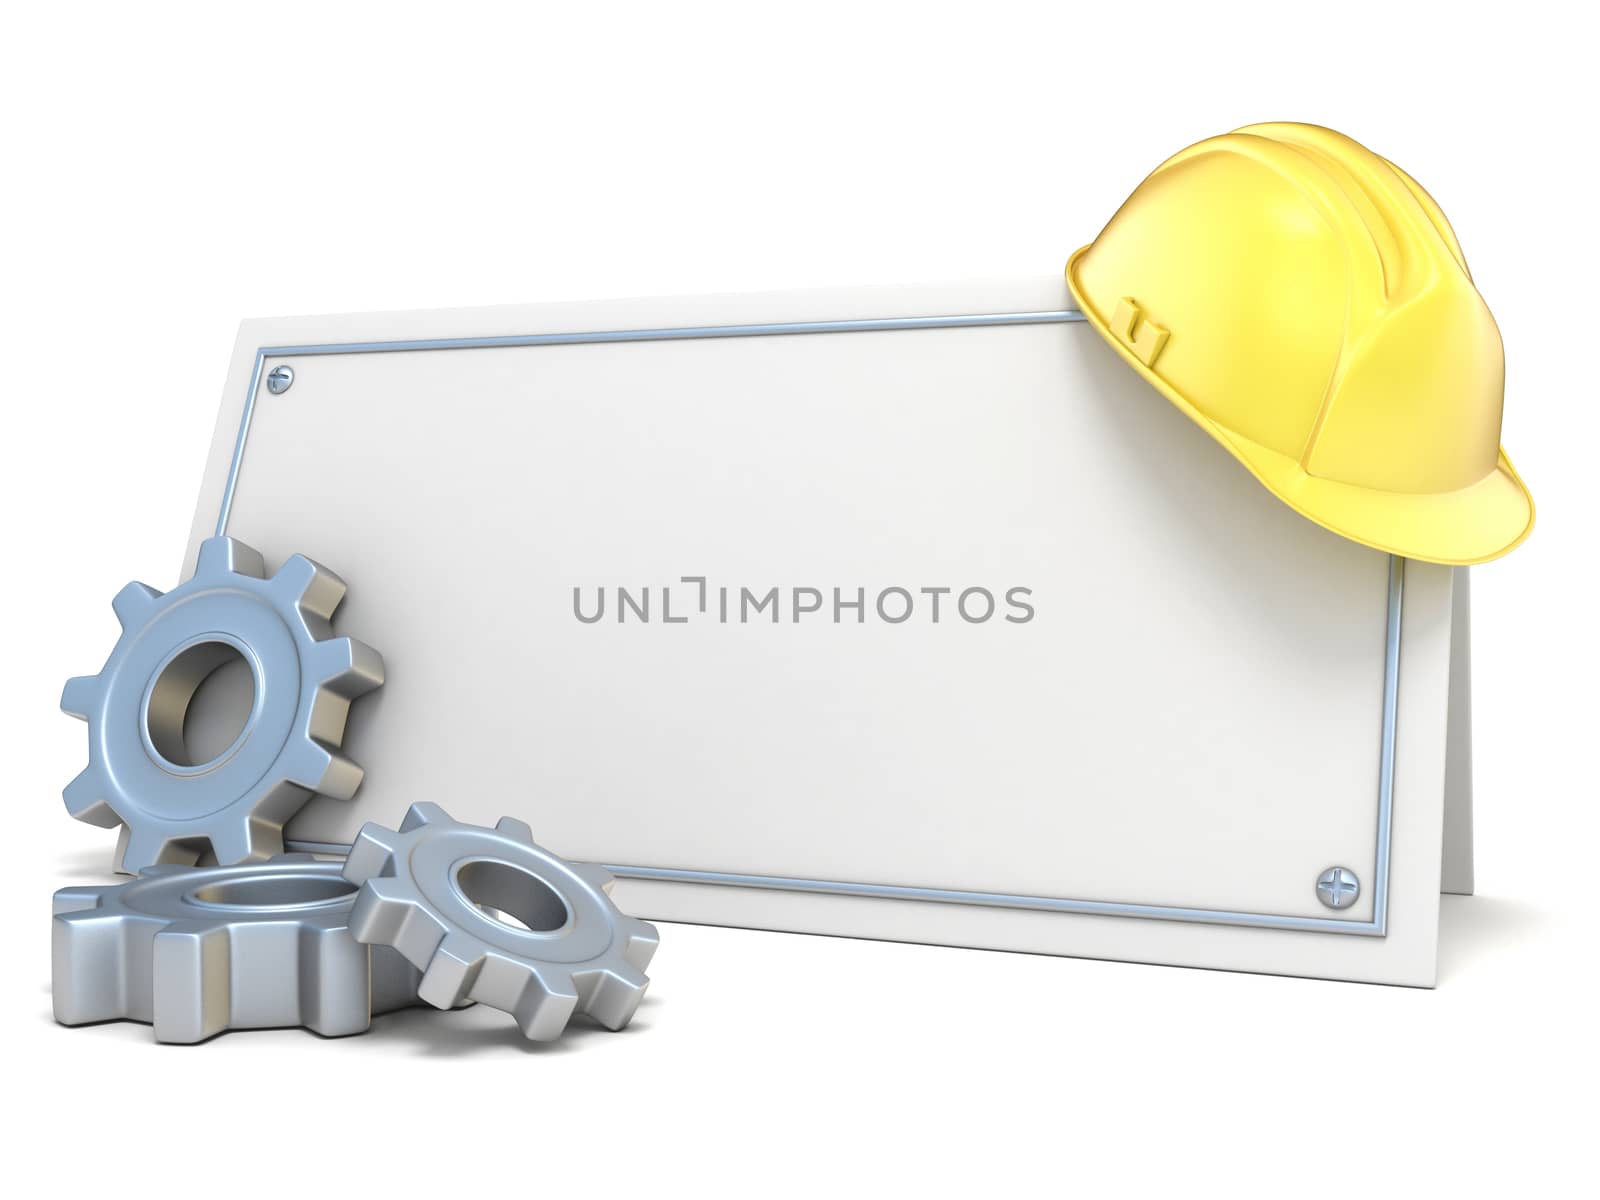 Construction helmet and gear wheels, on blank card. 3D render illustration isolated on white background